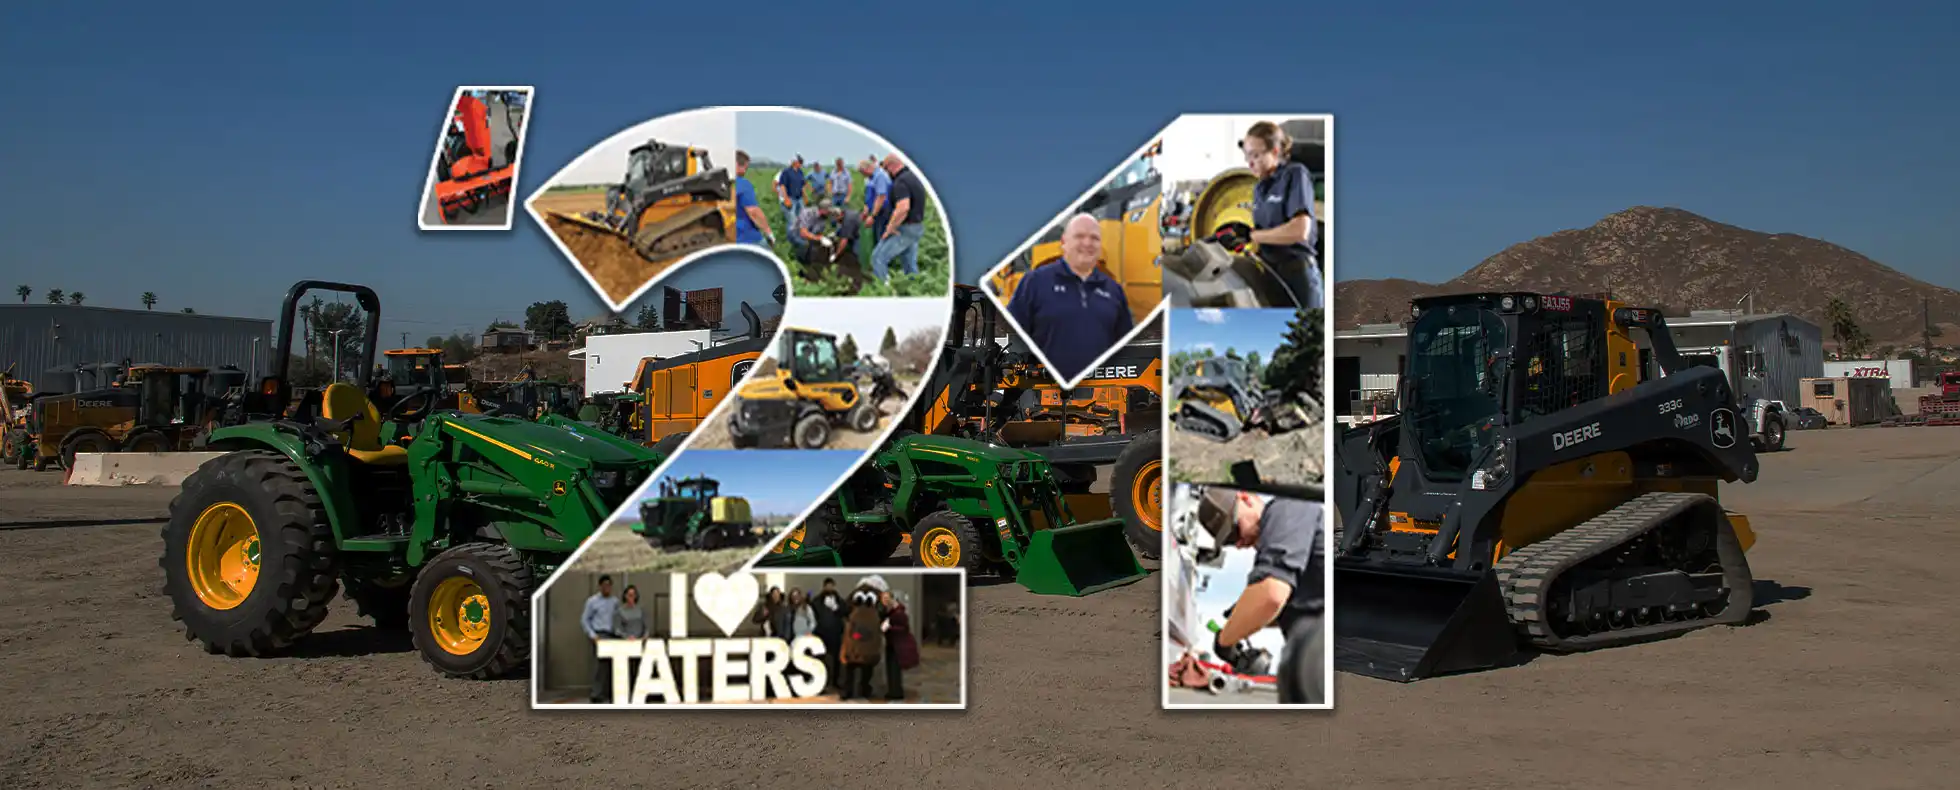 Year in Review: 21 Unforgettable Moments in 2021 with RDO Equipment Co.